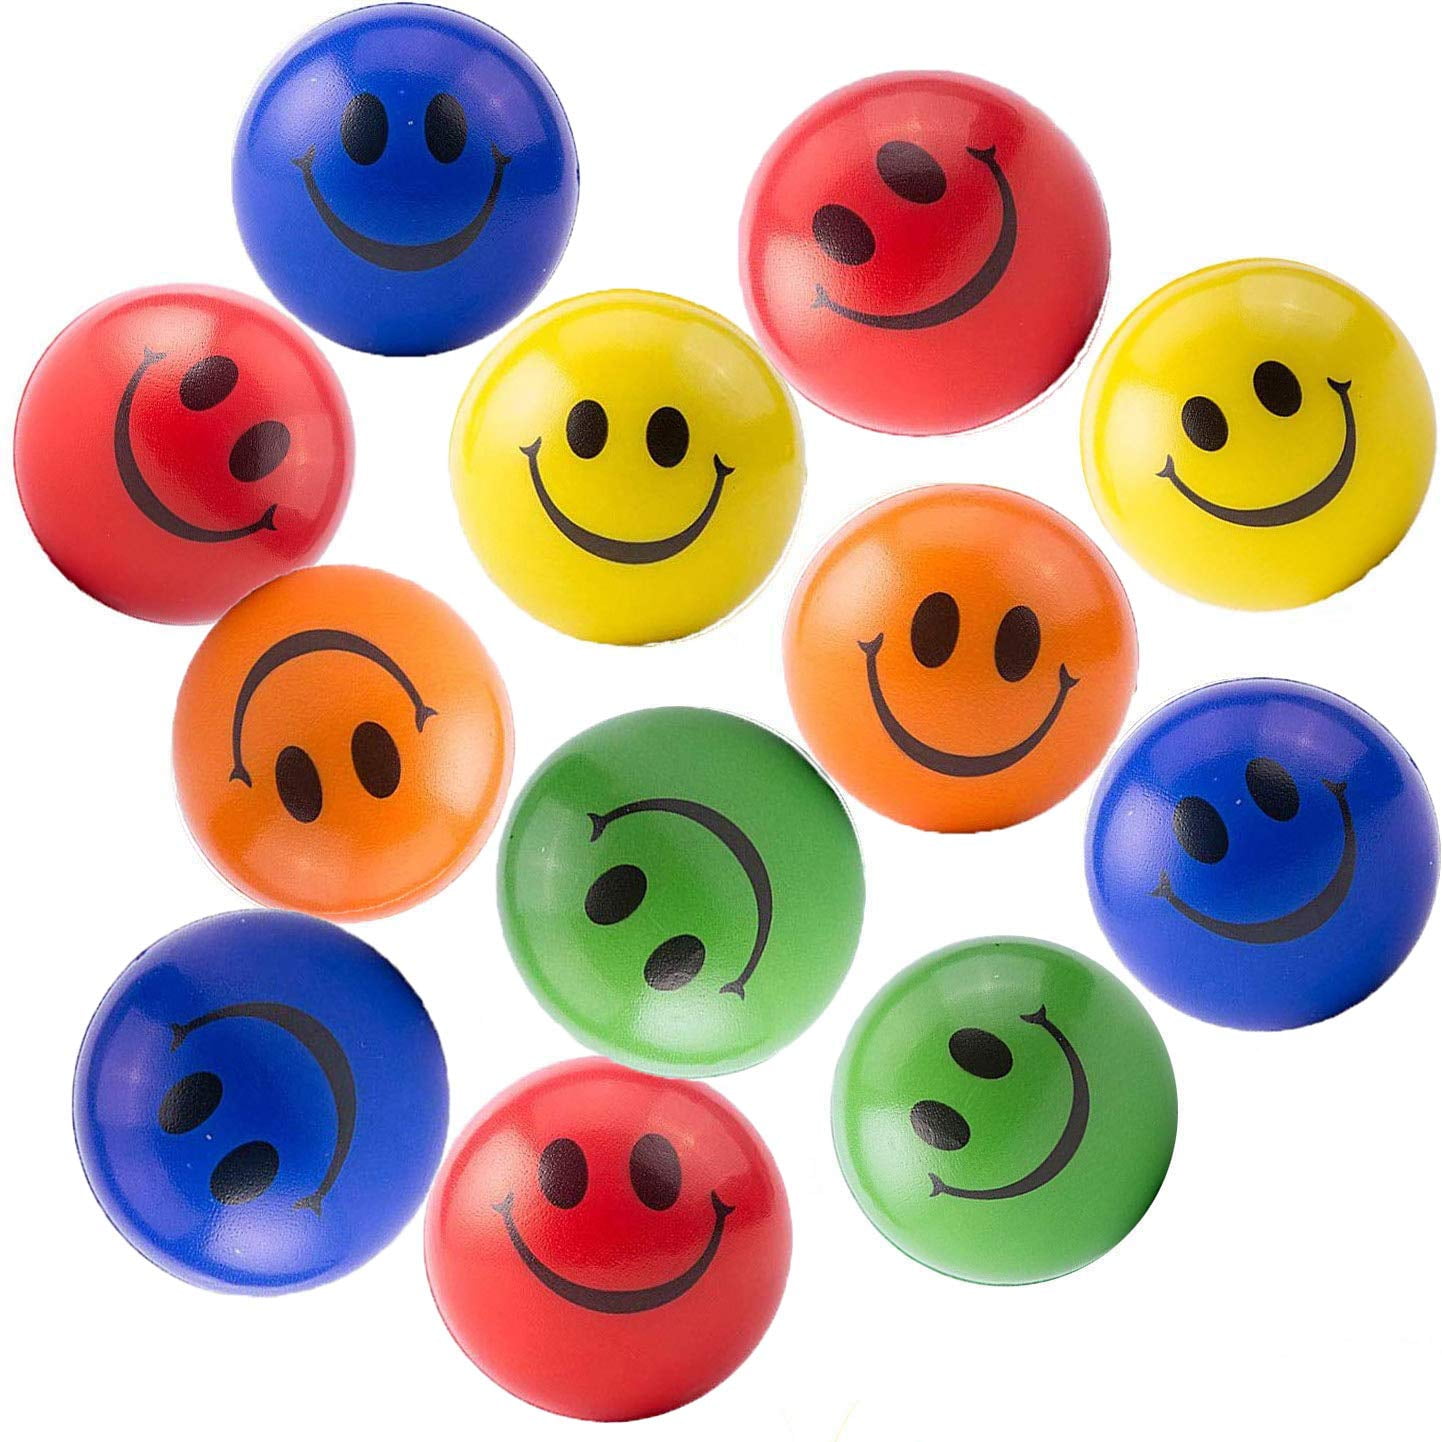 SMILEY FACE STRESS BALL 60MM 3 PCS EMOJI SQUEEZE HAND RELIEF TENSION NOVELTY TOY 